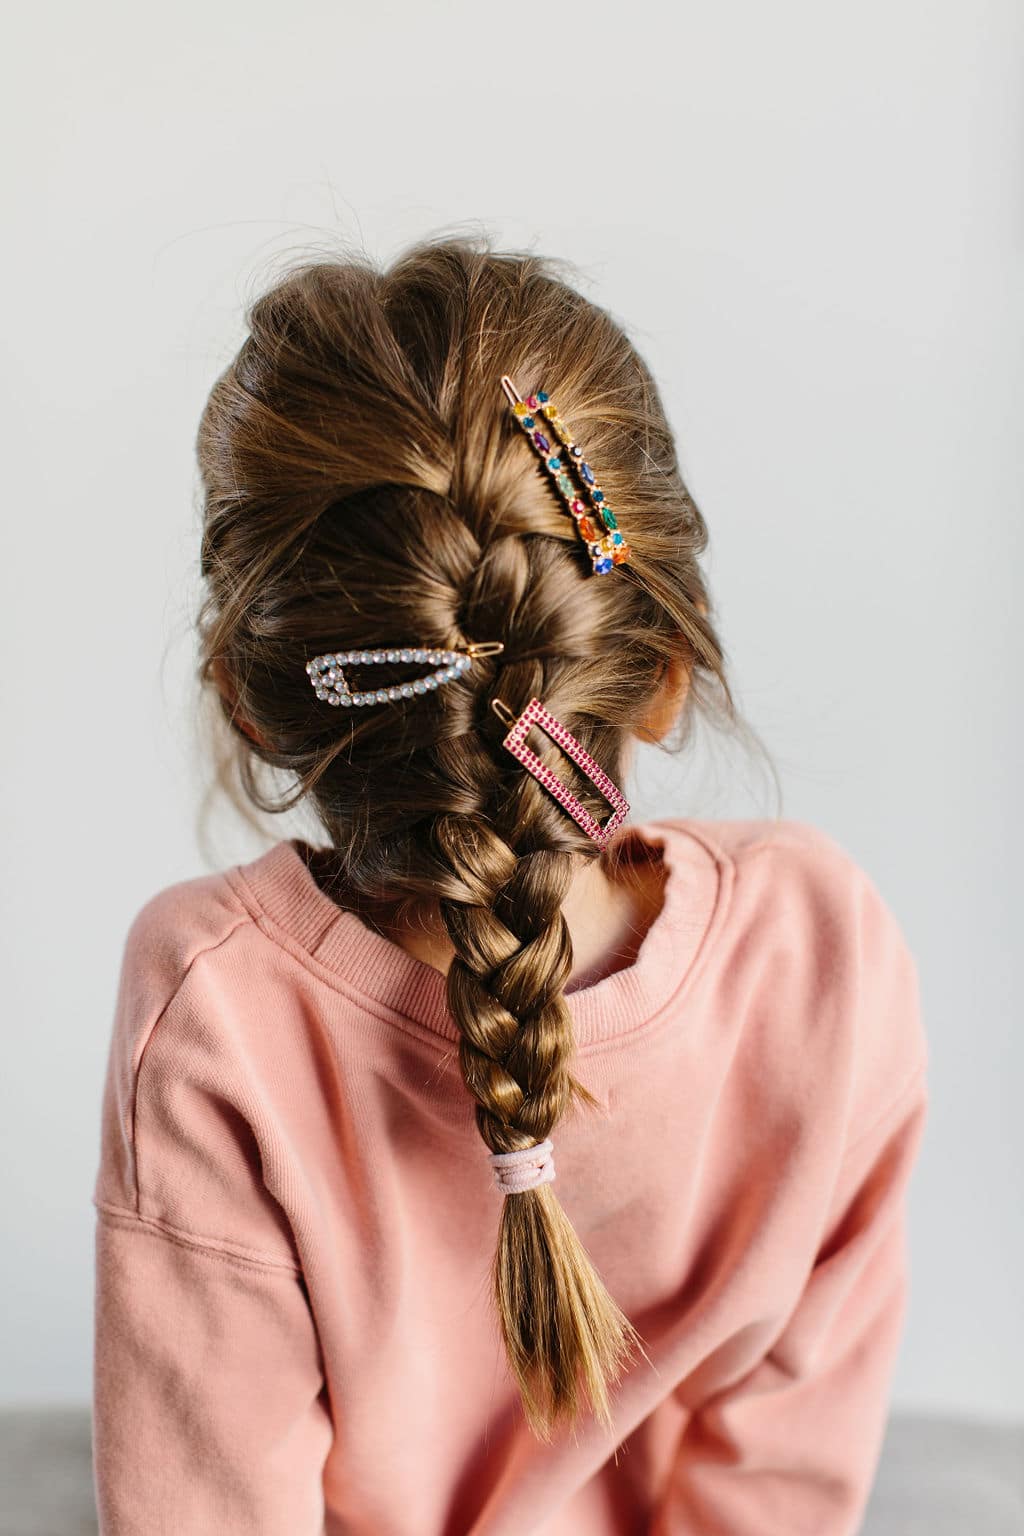 Kid's Hairstyles: How to French Braid